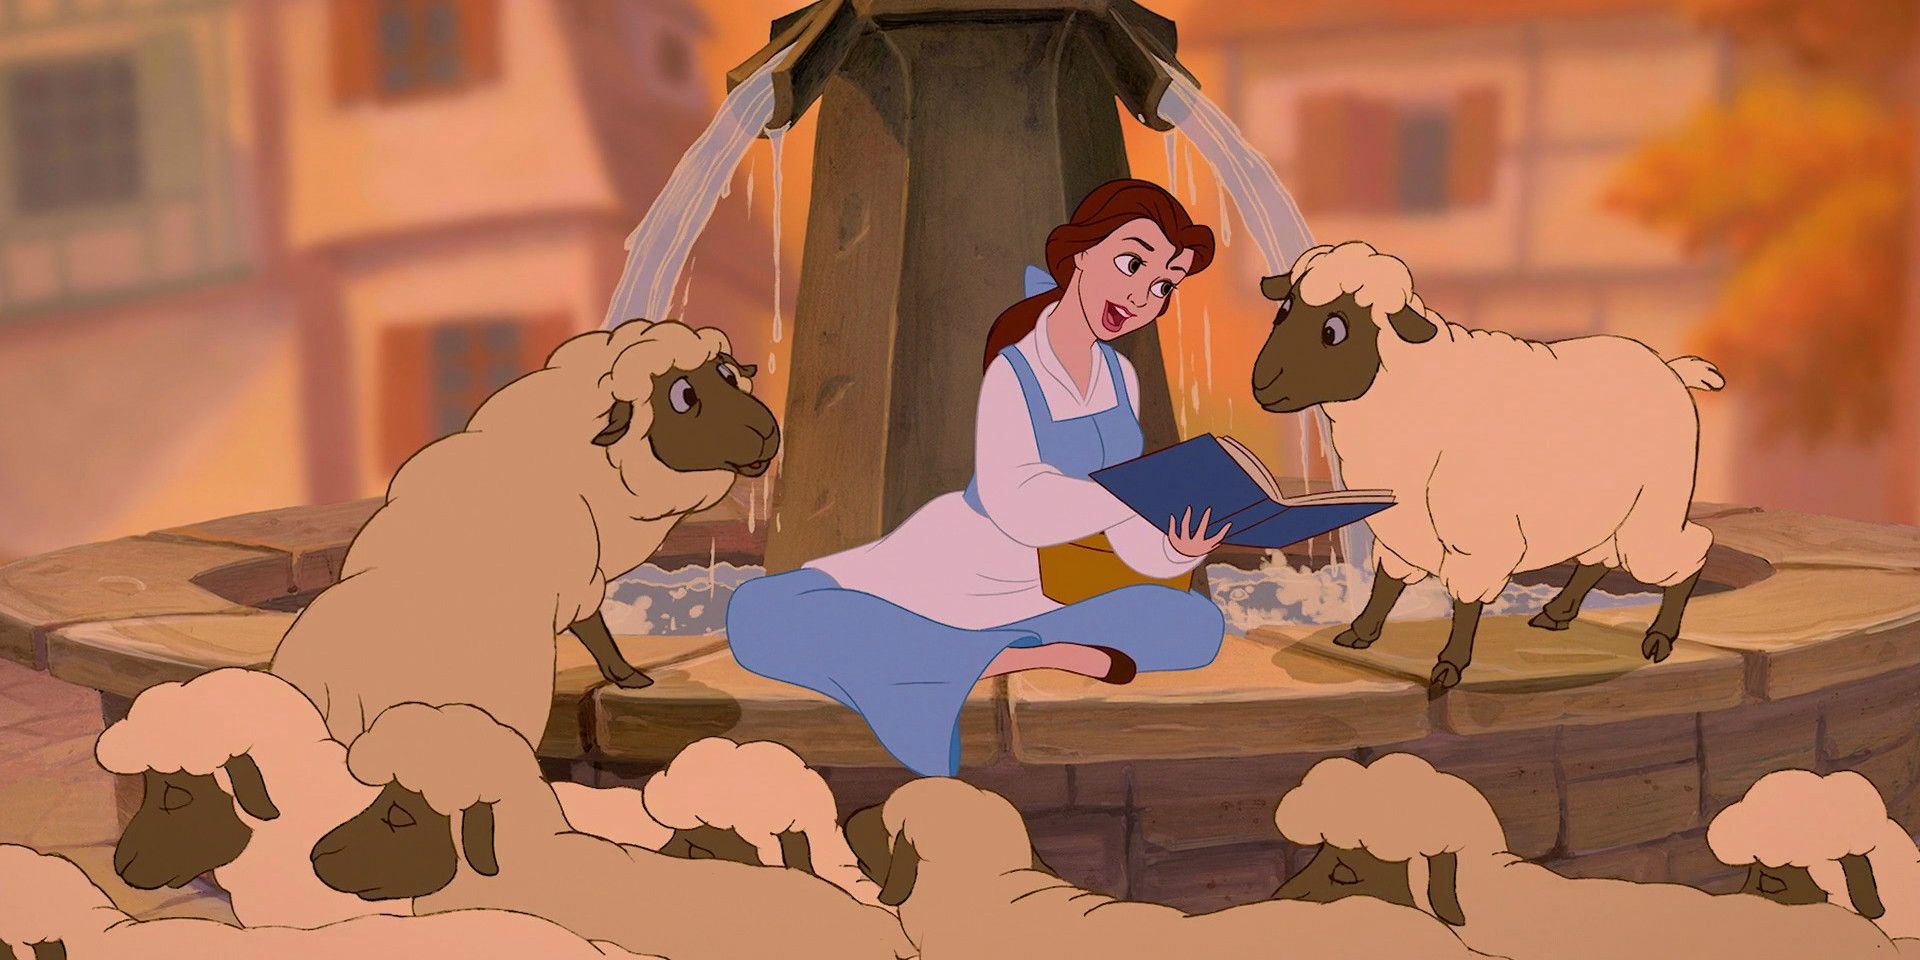 Every Song In Disneys Animated Beauty & The Beast Ranked